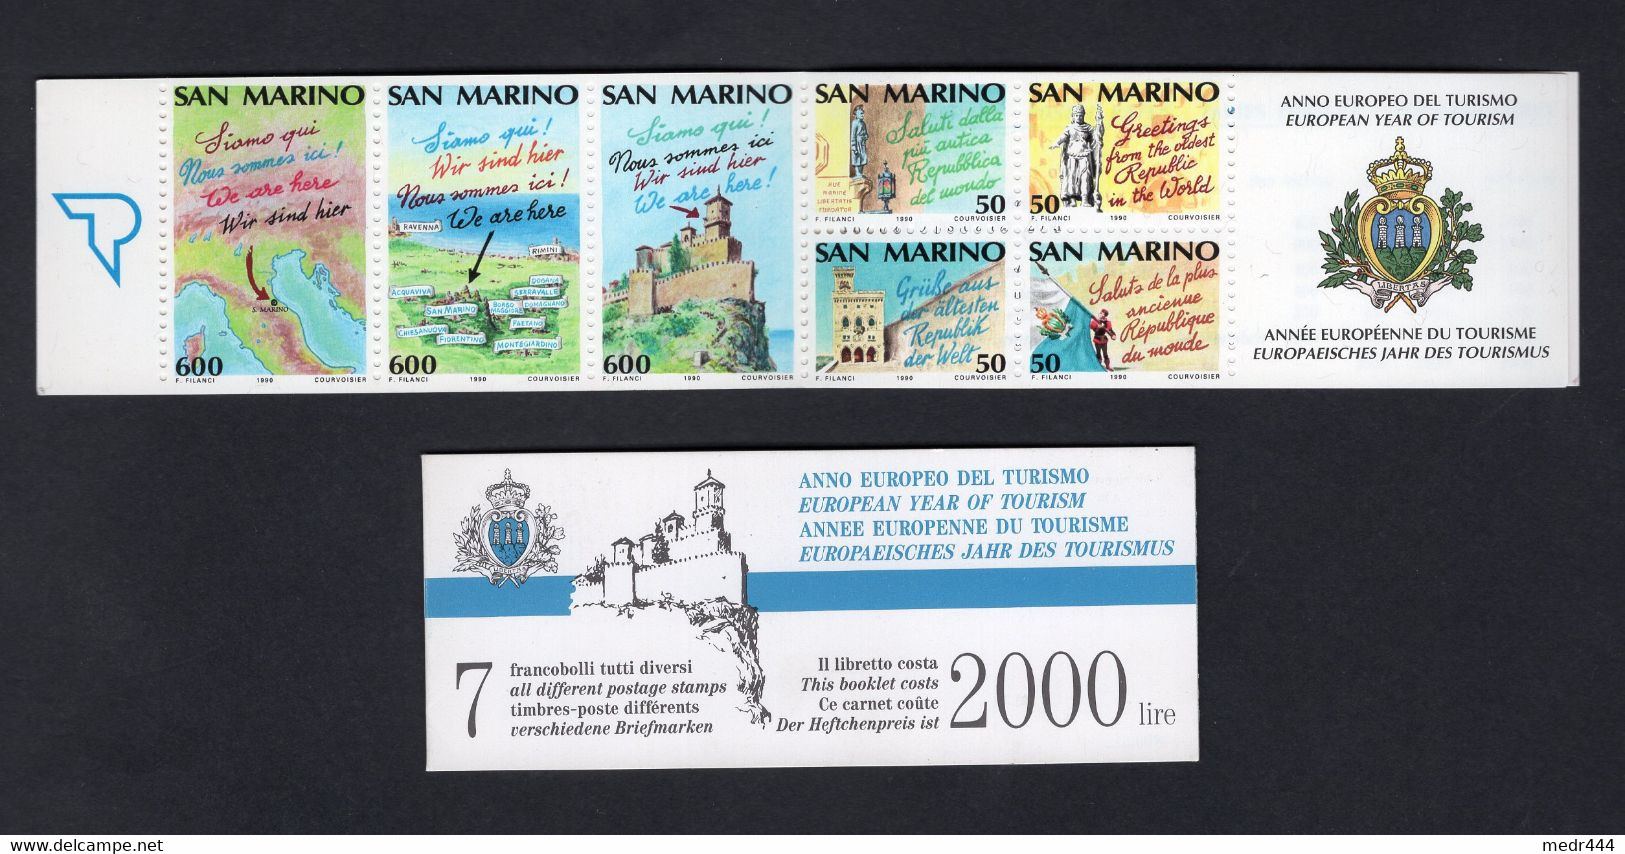 San Marino 1990 - Booklet - European Tourism Day - MNH** - Excellent Quality - Superb*** - Cuadernillos